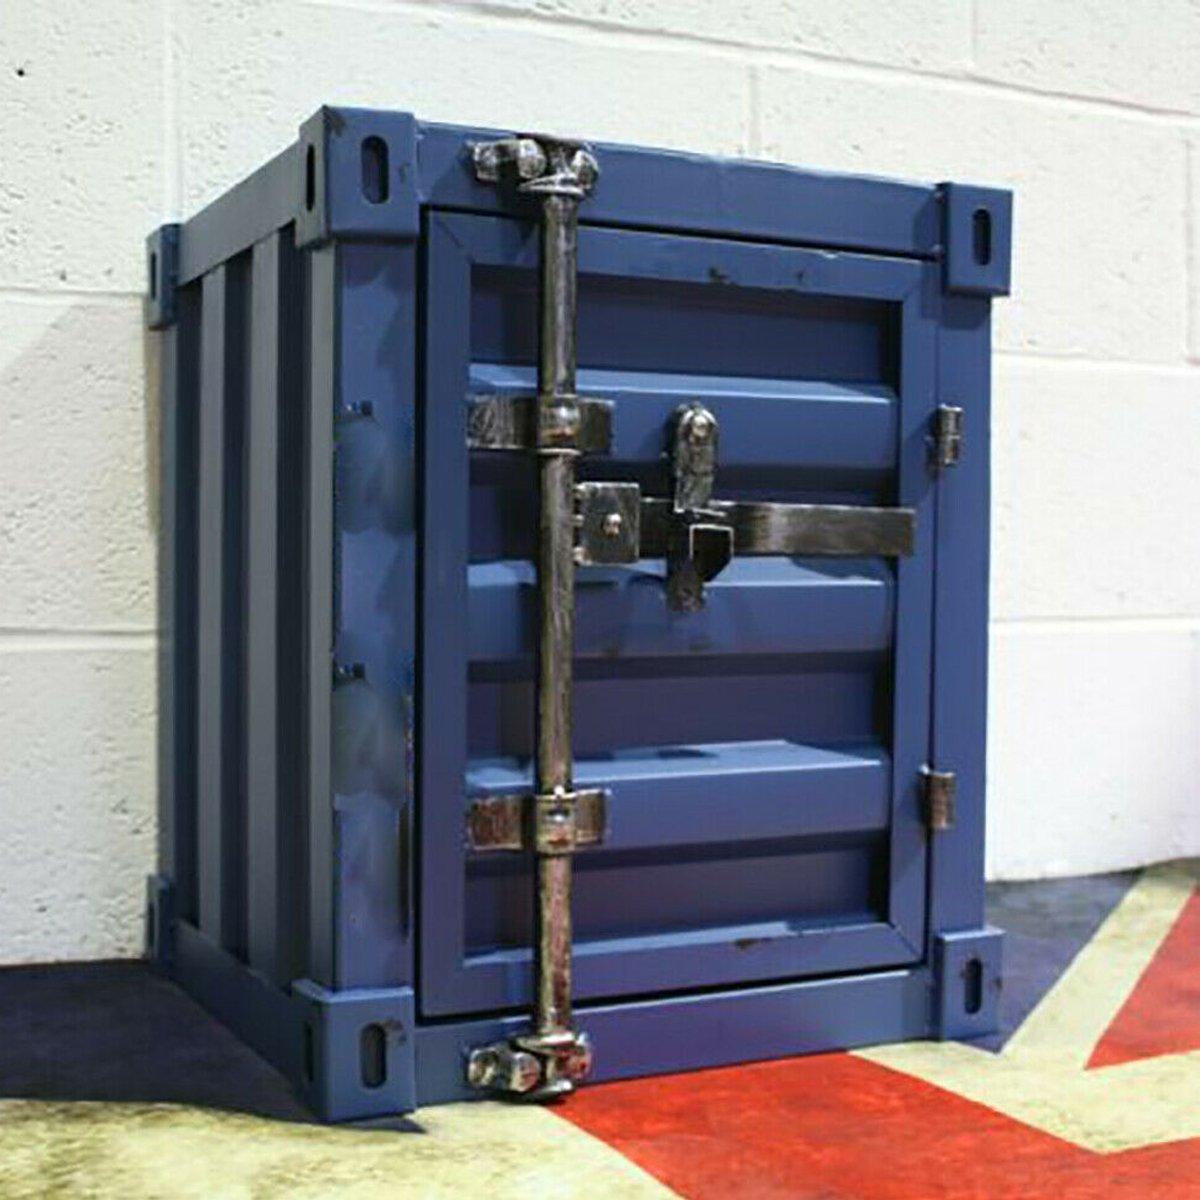 Blue Industrial Shipping Container Table Storage Shelf Unit Vintage Bedside Coffee Side Table Chest 